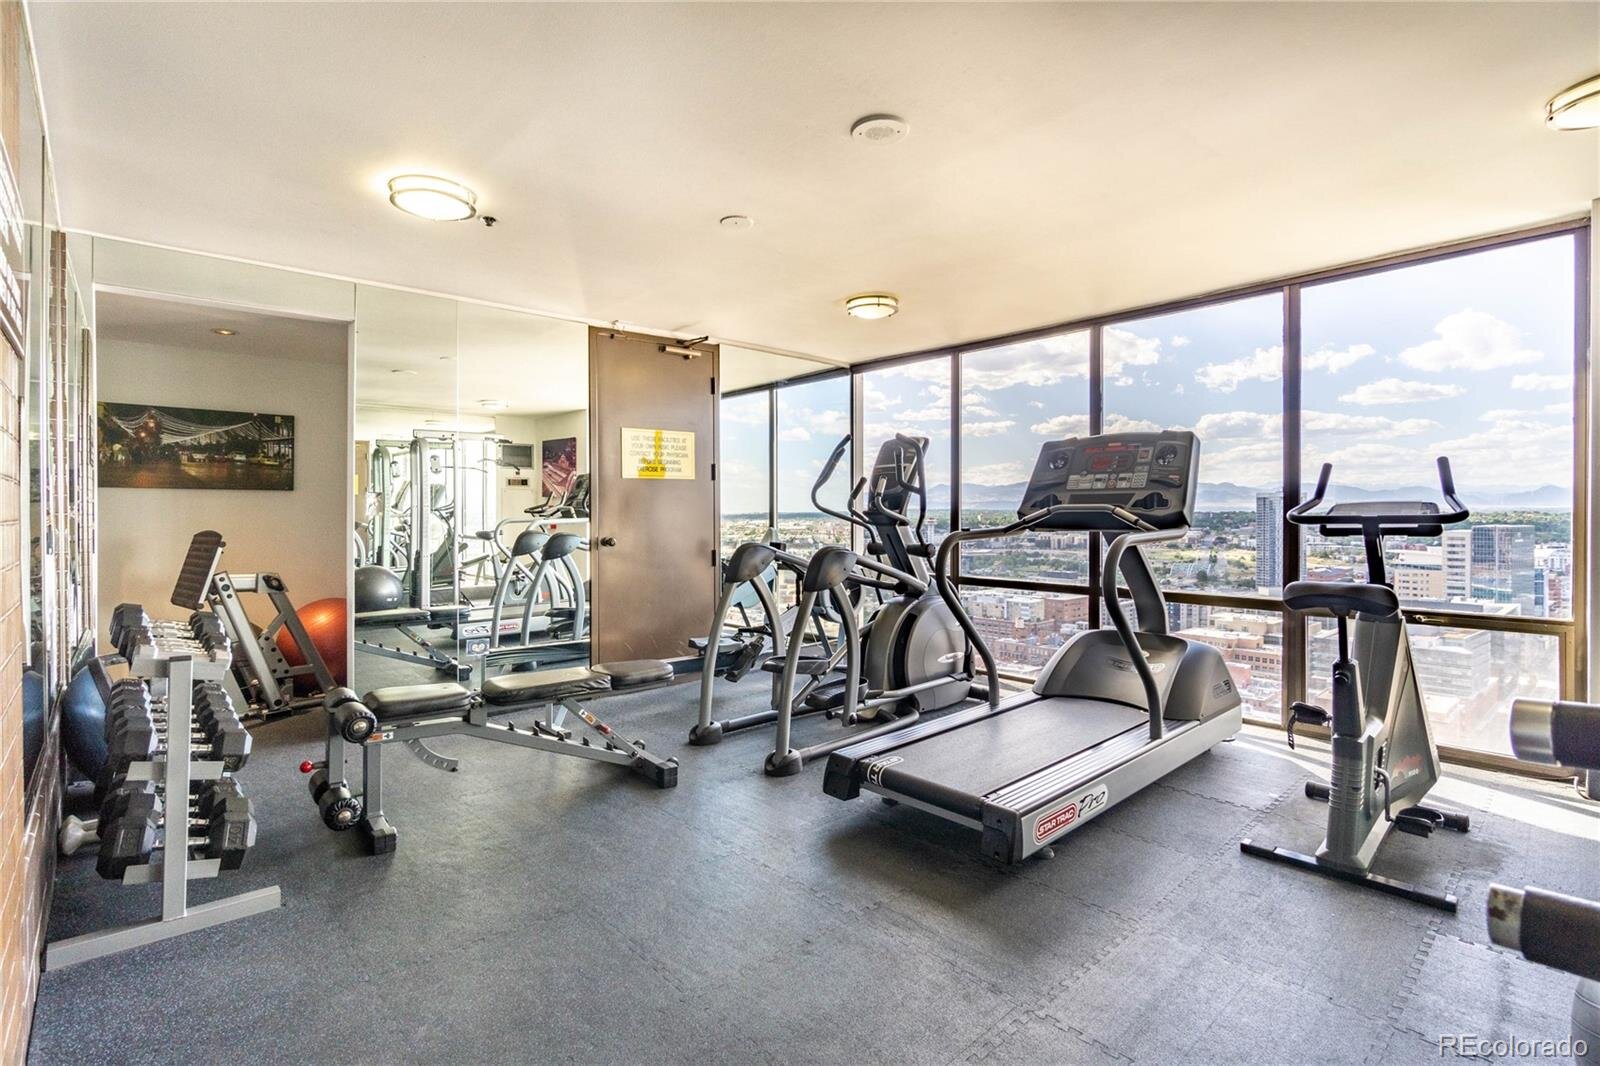 The gym at the Barclay downtown Denver condos with equipment facing city views through floor to ceiling windows.